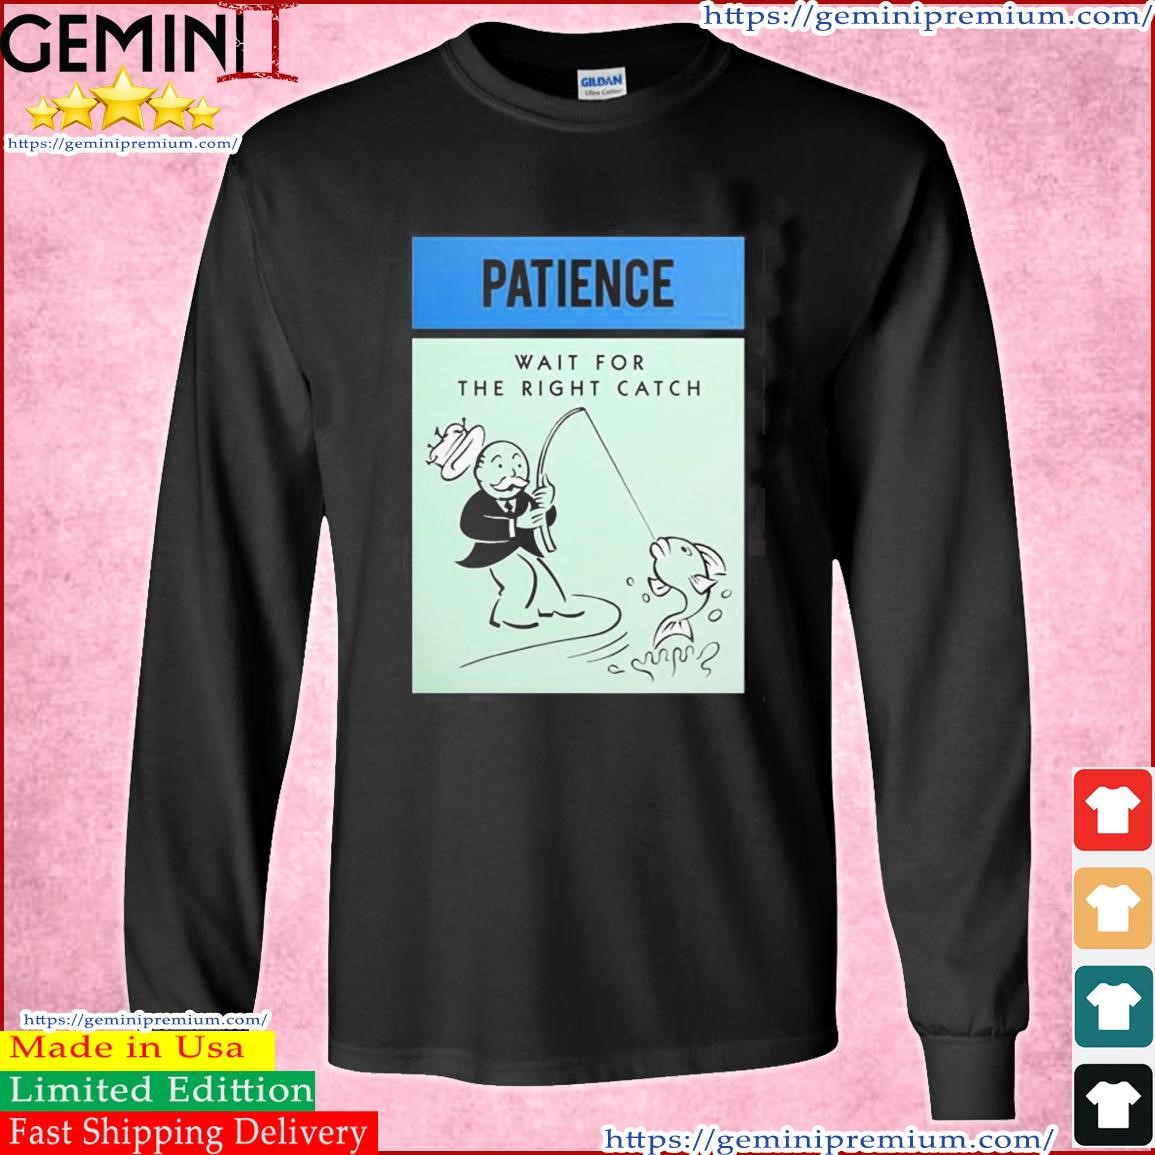 Patience Wait For The Right Catch Shirt Long Sleeve Tee.jpg